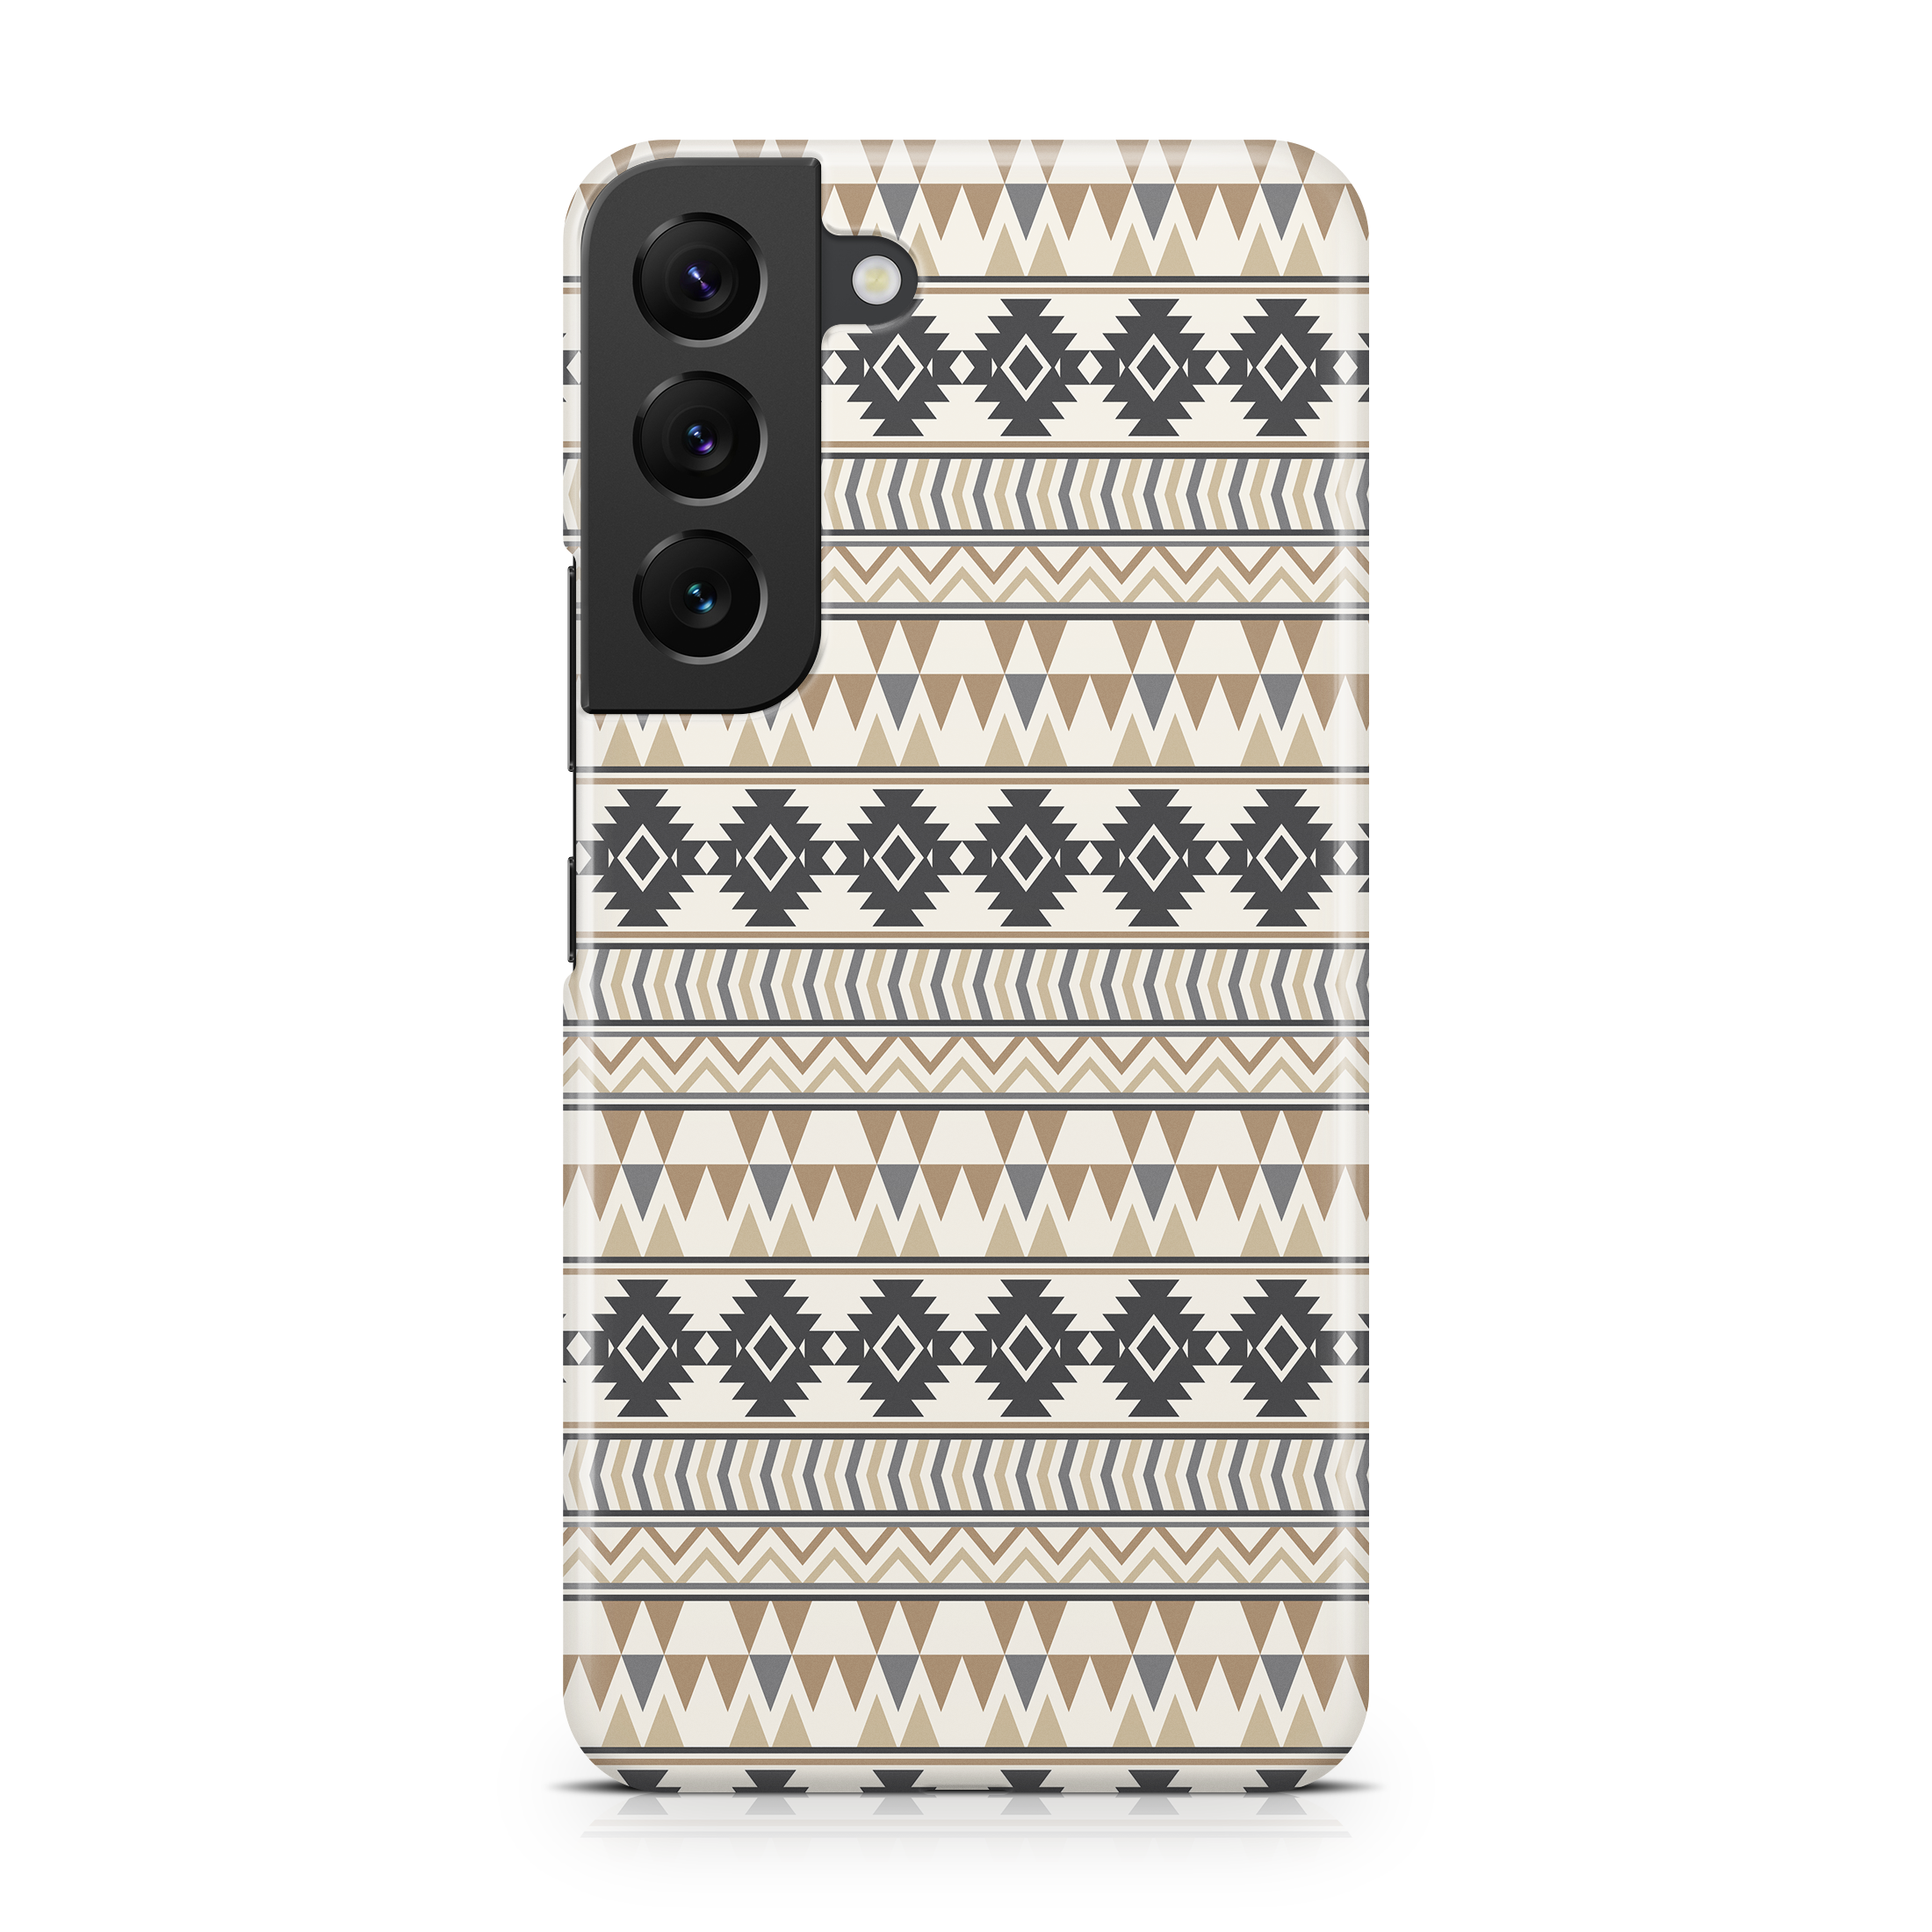 Neutral Aztec - Samsung phone case designs by CaseSwagger